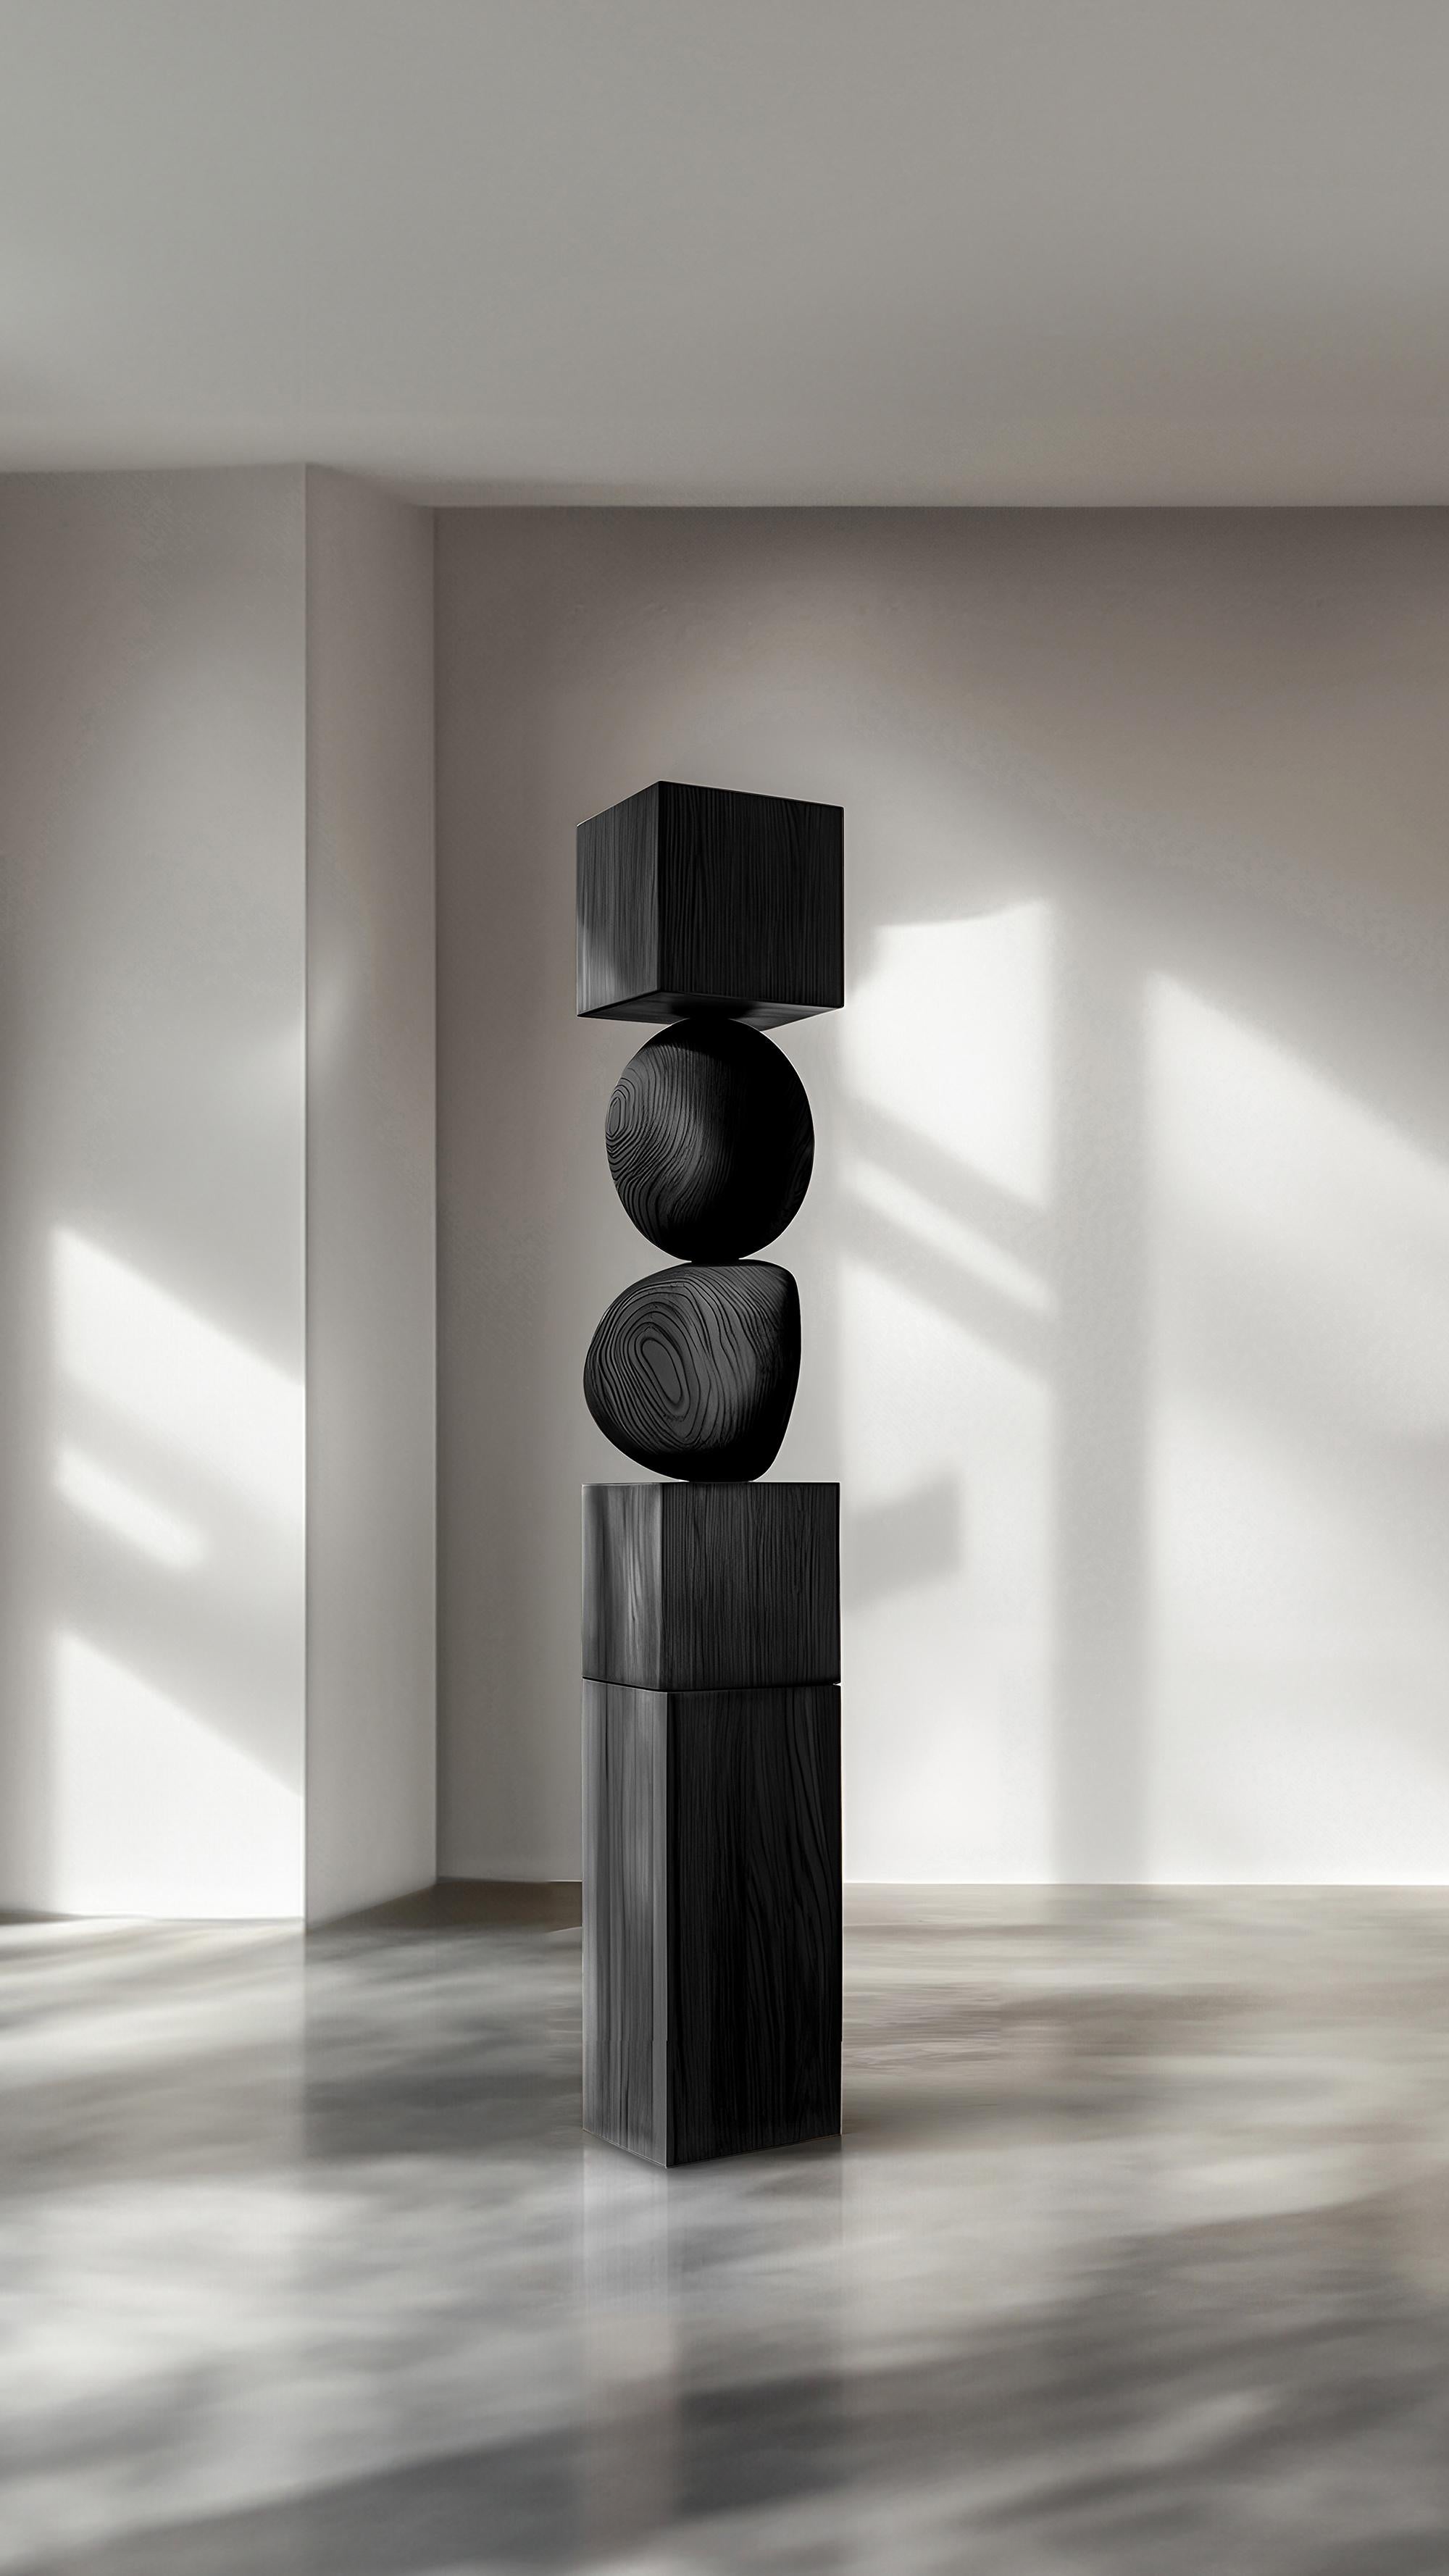 Hand-Crafted Joel Escalona's Creation, Dark Black Solid Wood Totem, Still Stand No84 For Sale